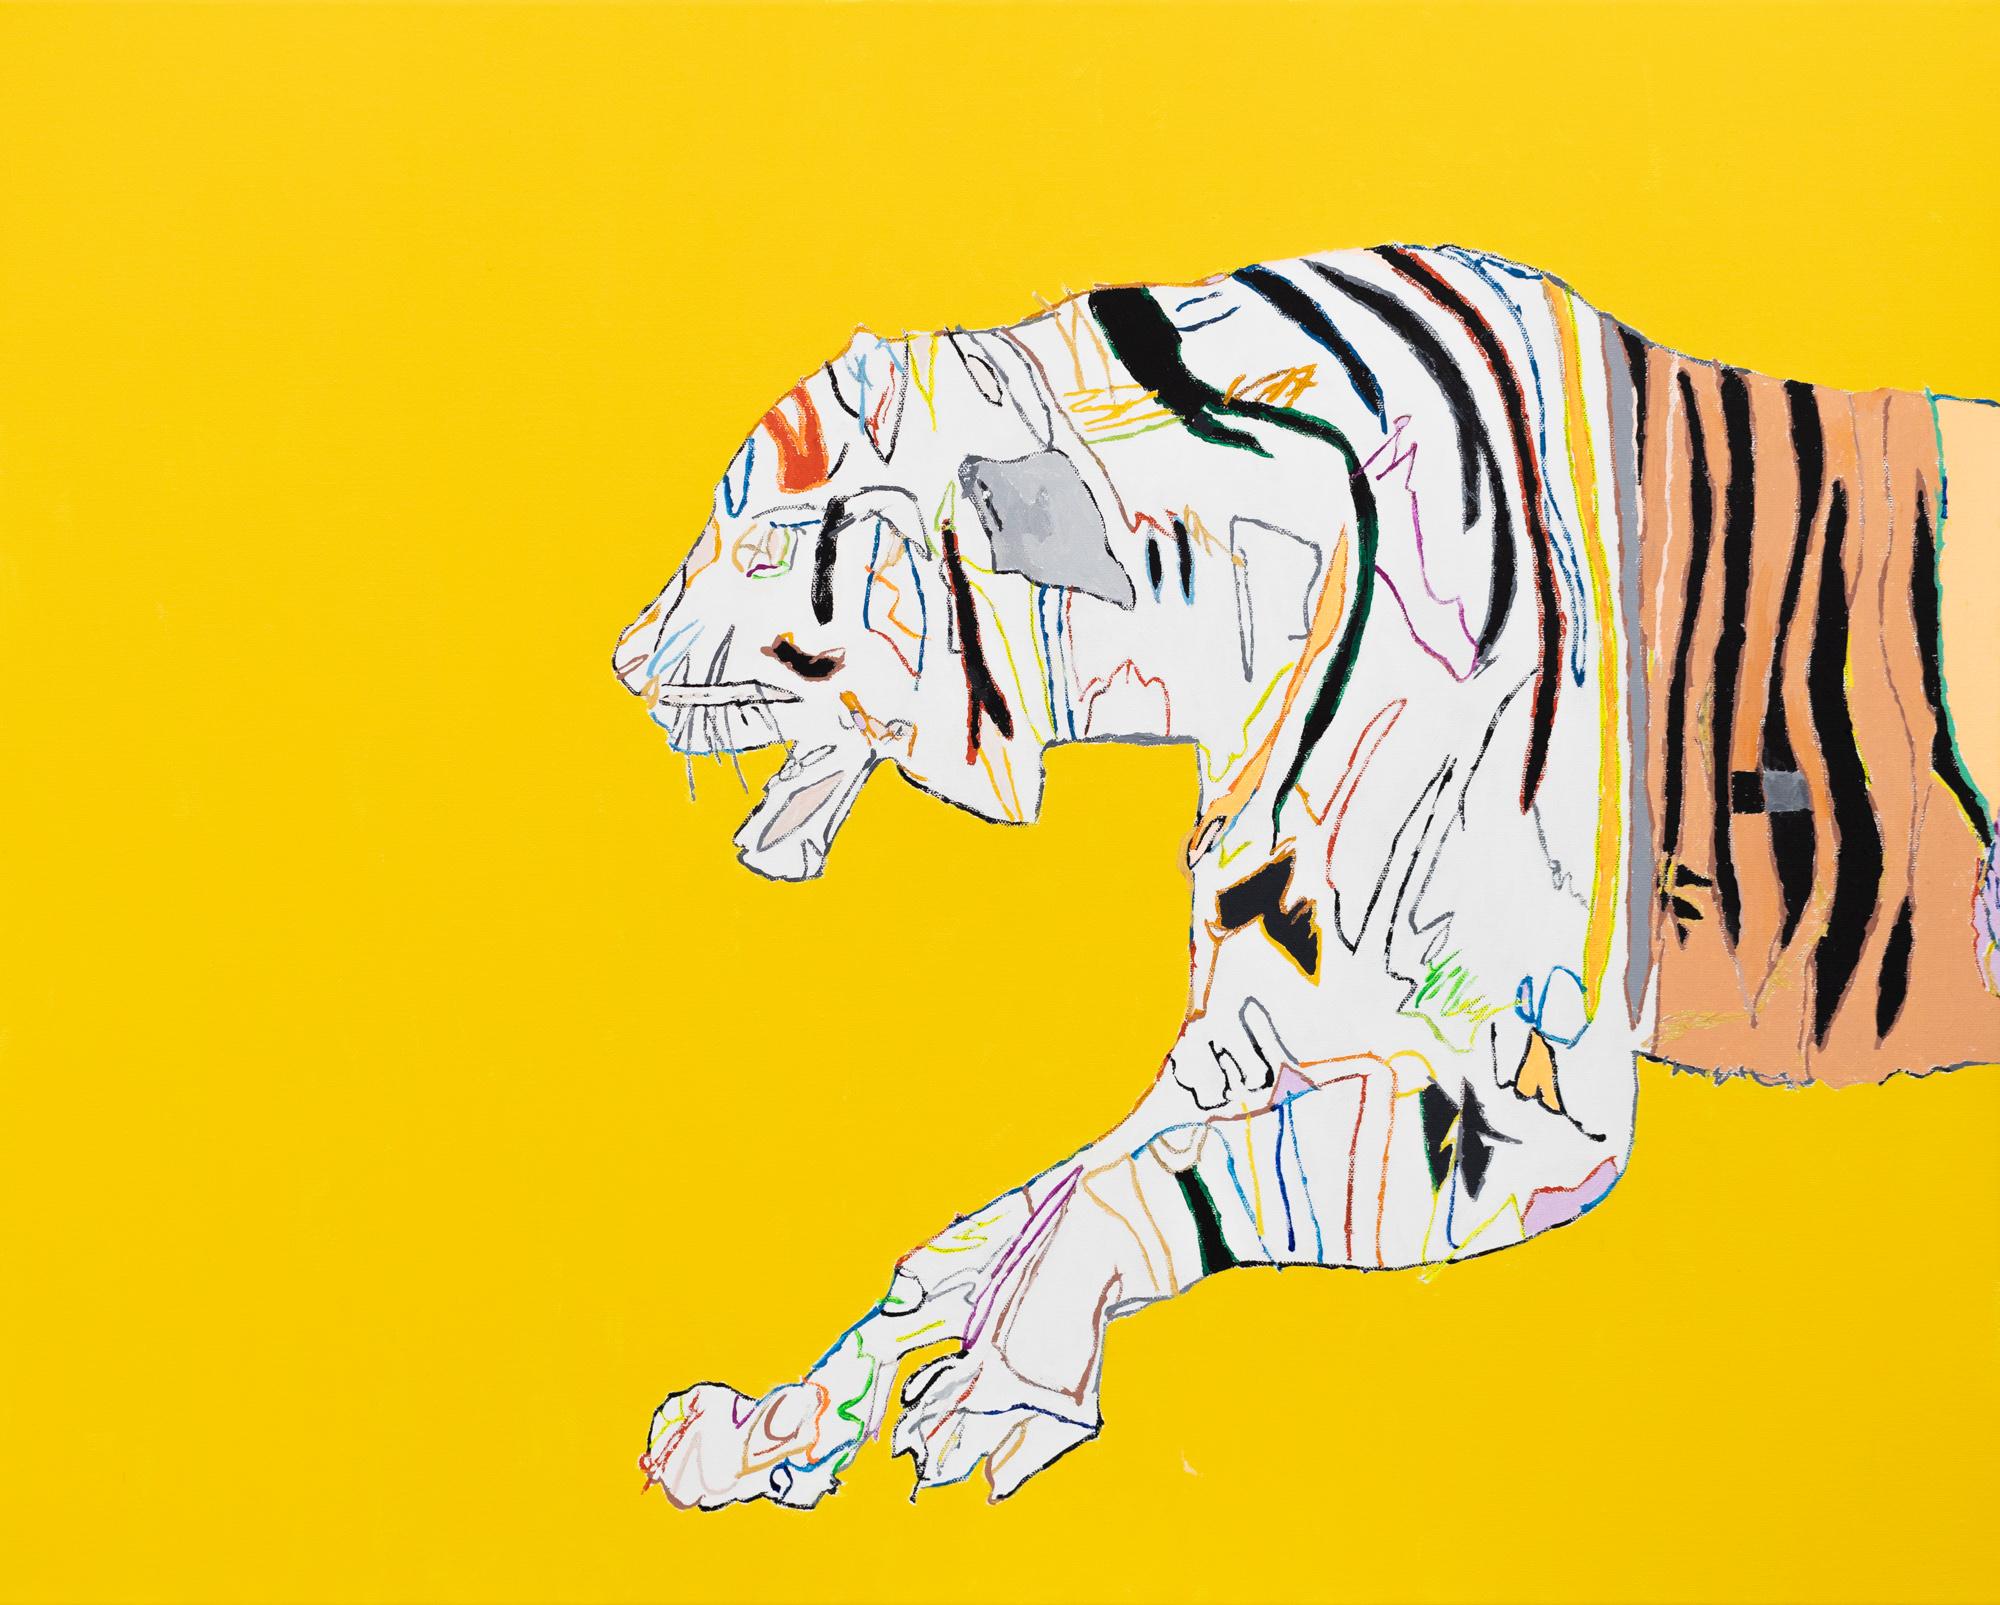 James Oliver Animal Painting - "Tigress in Transition" abstract tiger motif, acrylic on canvas